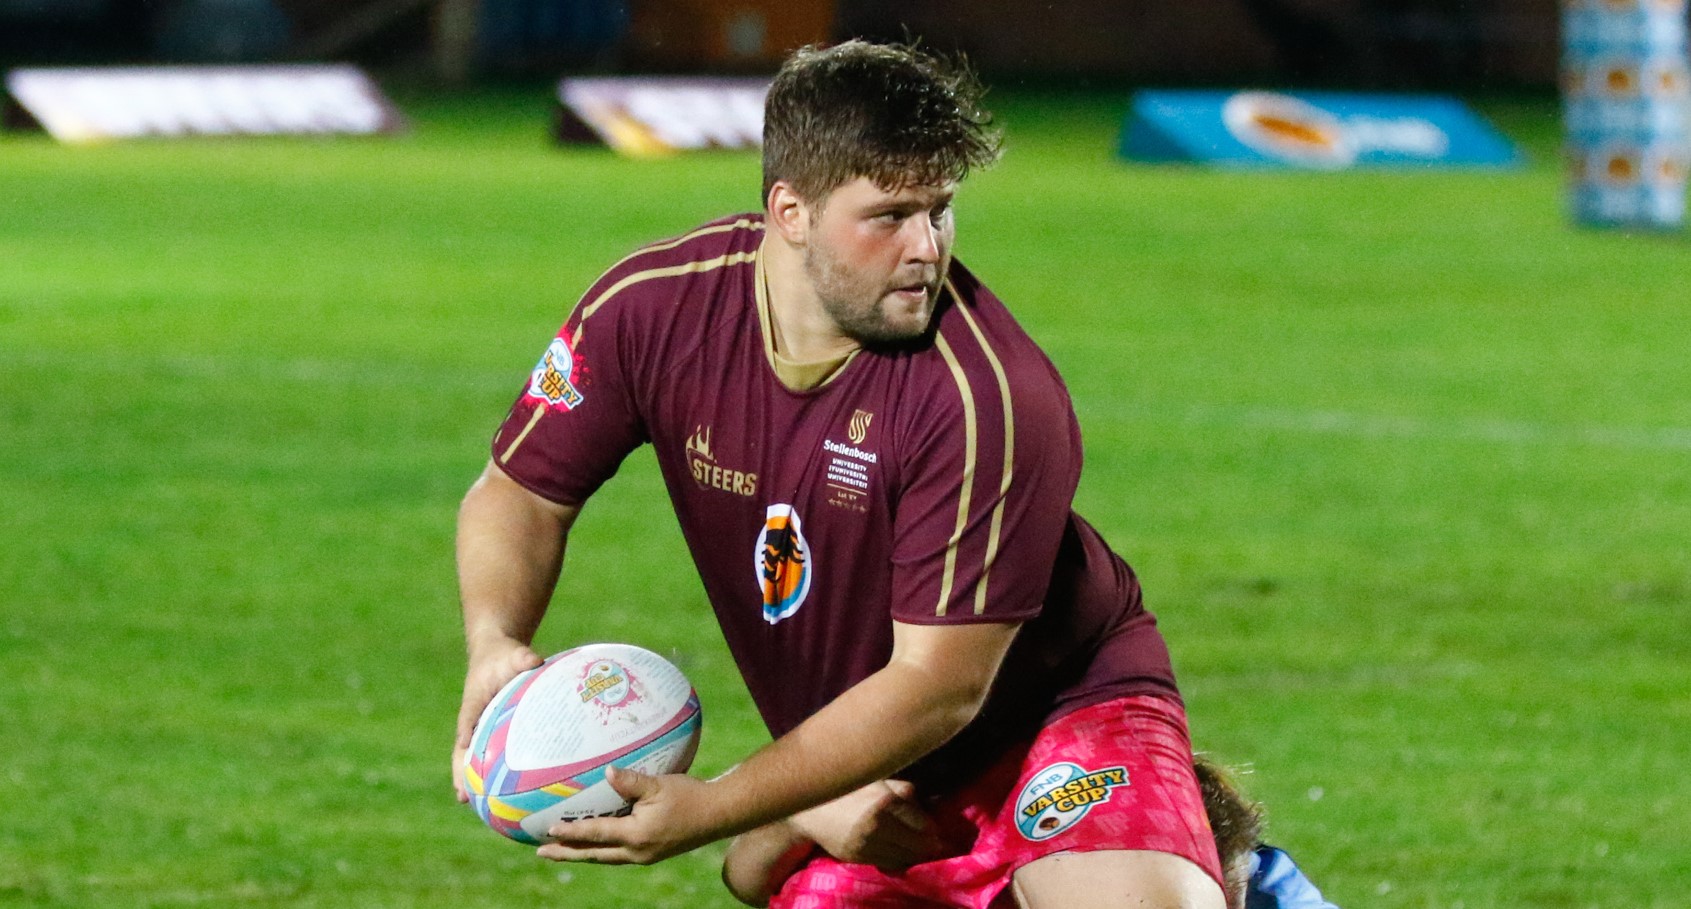 Sean Swart of maties during the match between the FNB CUT and FNB Maties at the CUT Rugby Stadium in Bloemfontein. 14 MARCH 2022